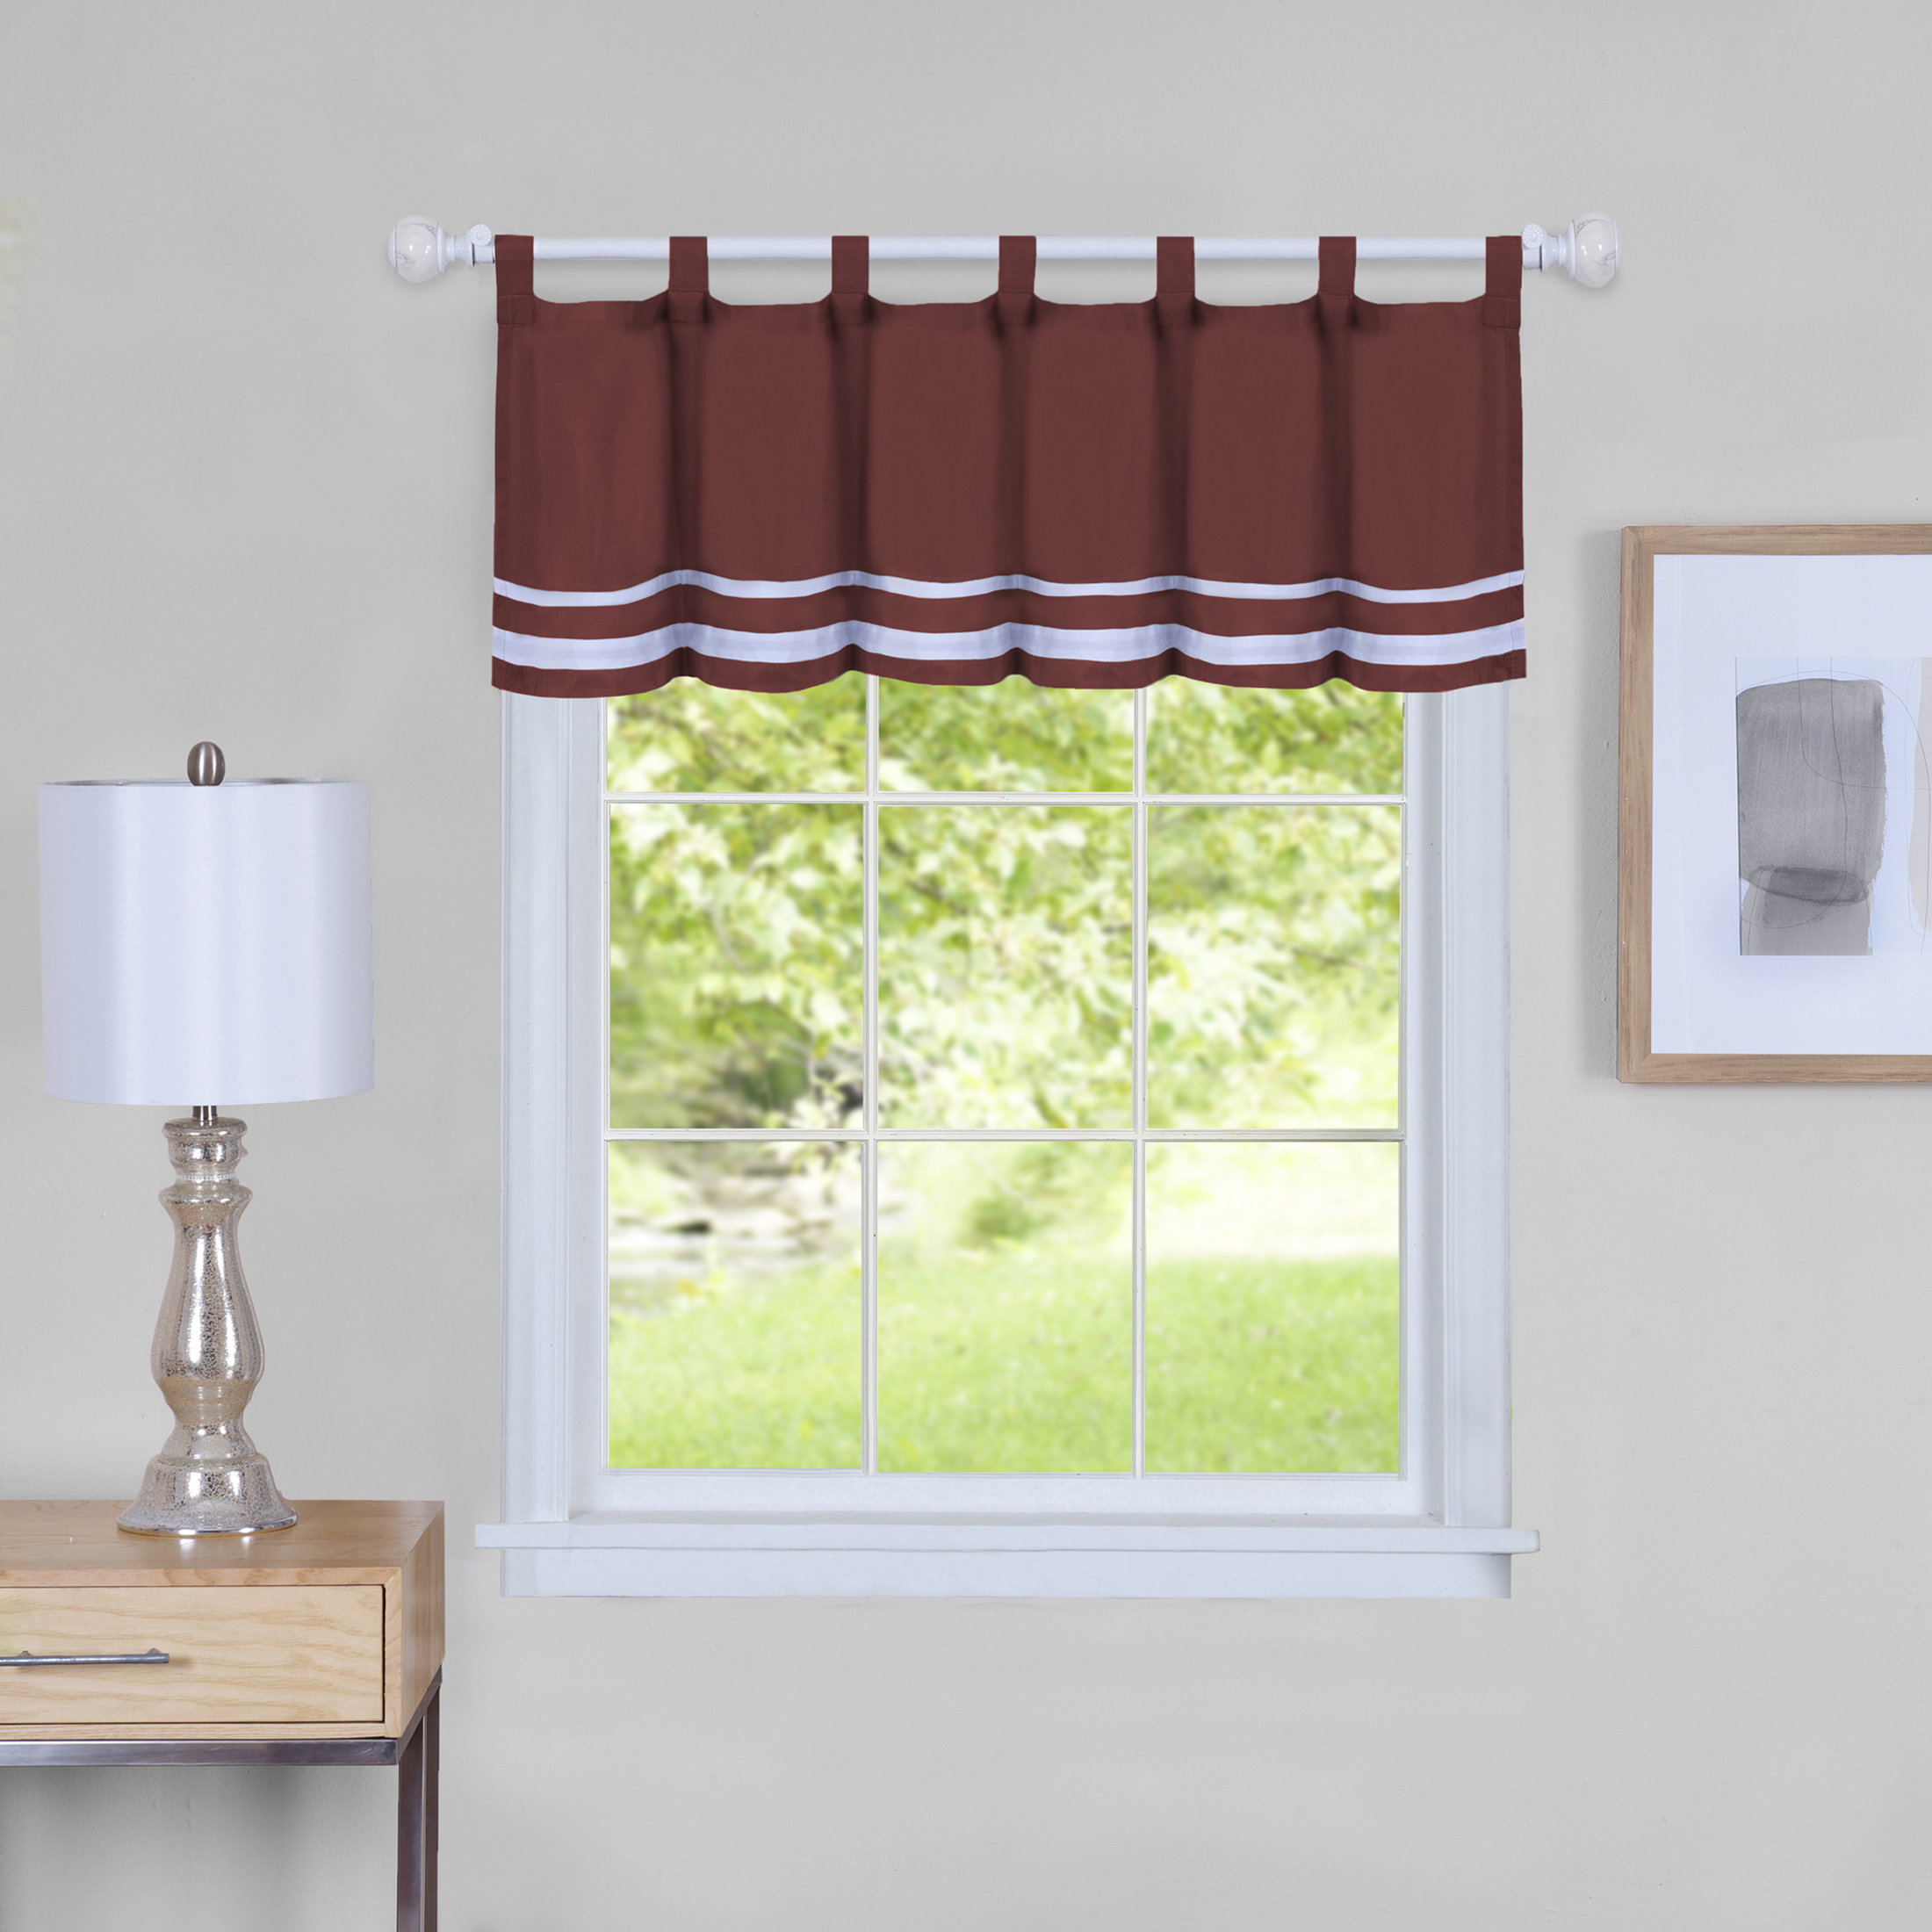 Achim 3-Piece Window Kitchen Curtain Set Solid Striped Tier Panels and Tab Top Valance